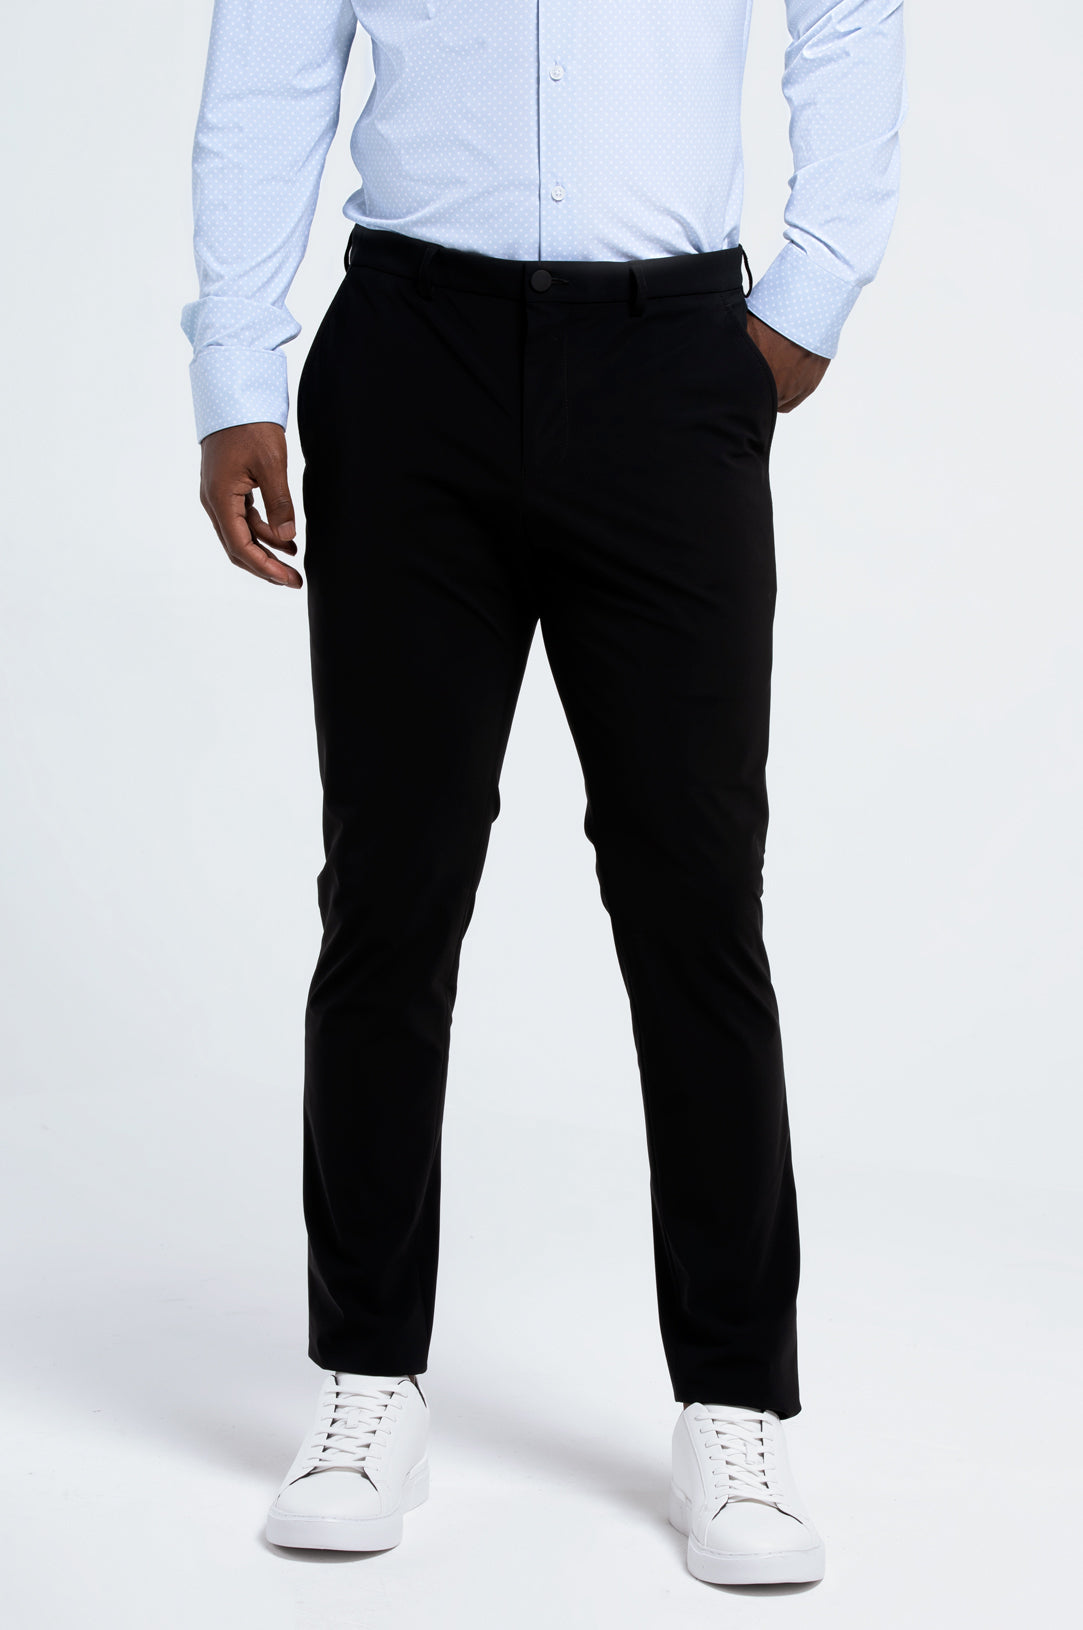 Sustainable Men's Black Chino Pants - State of Matter